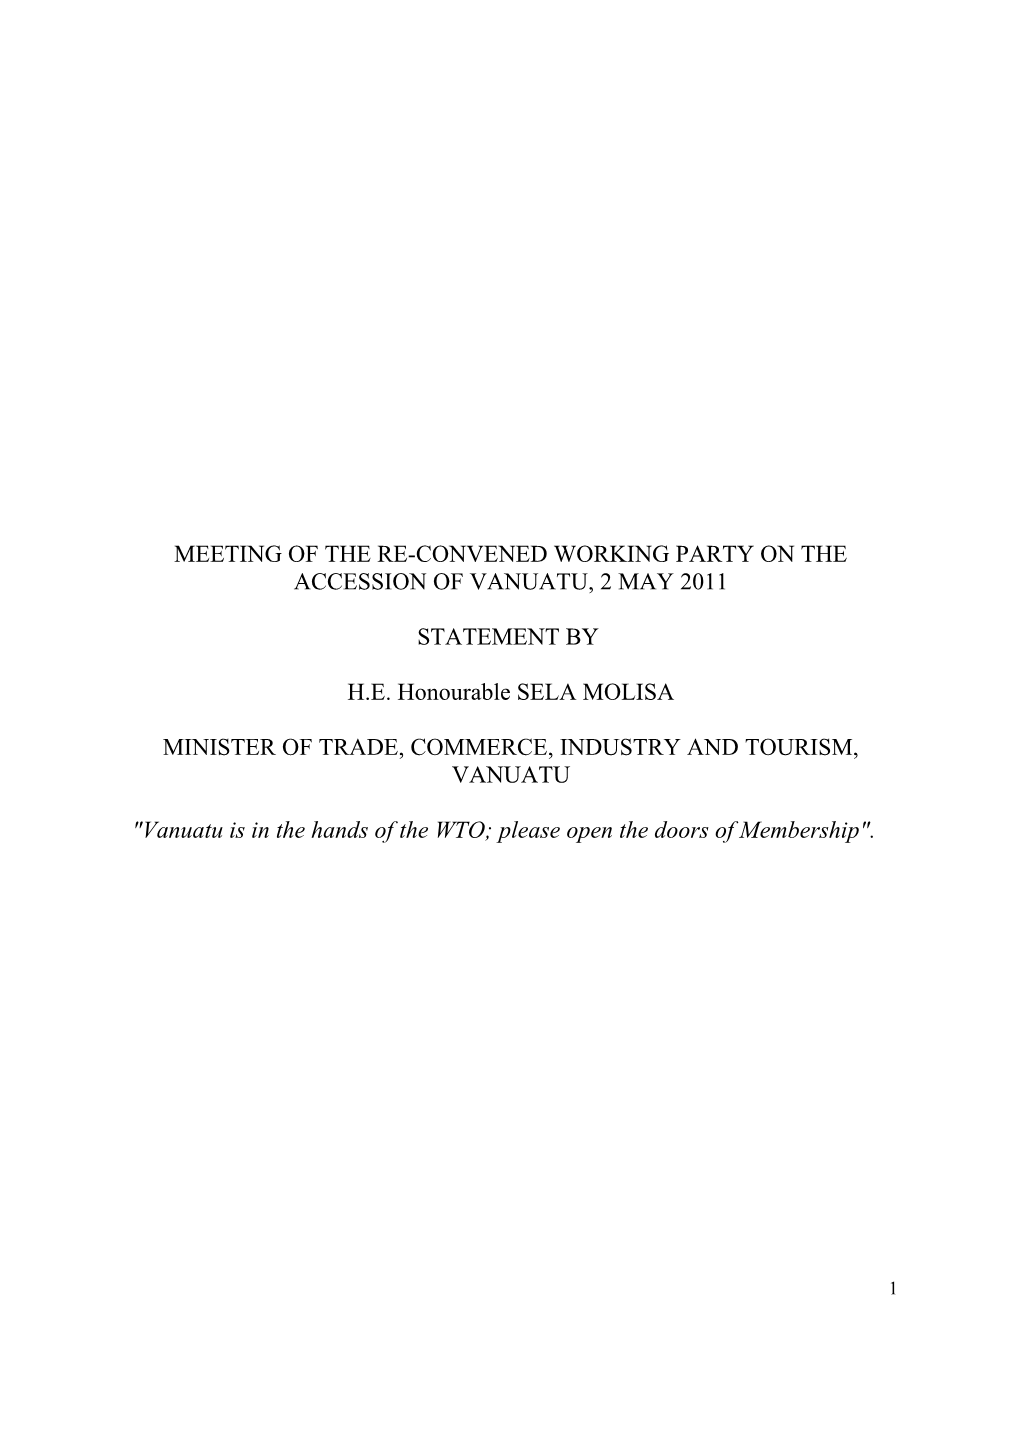 Meeting of the Re-Convened Working Party on the Accession of Vanuatu, 2May 2011